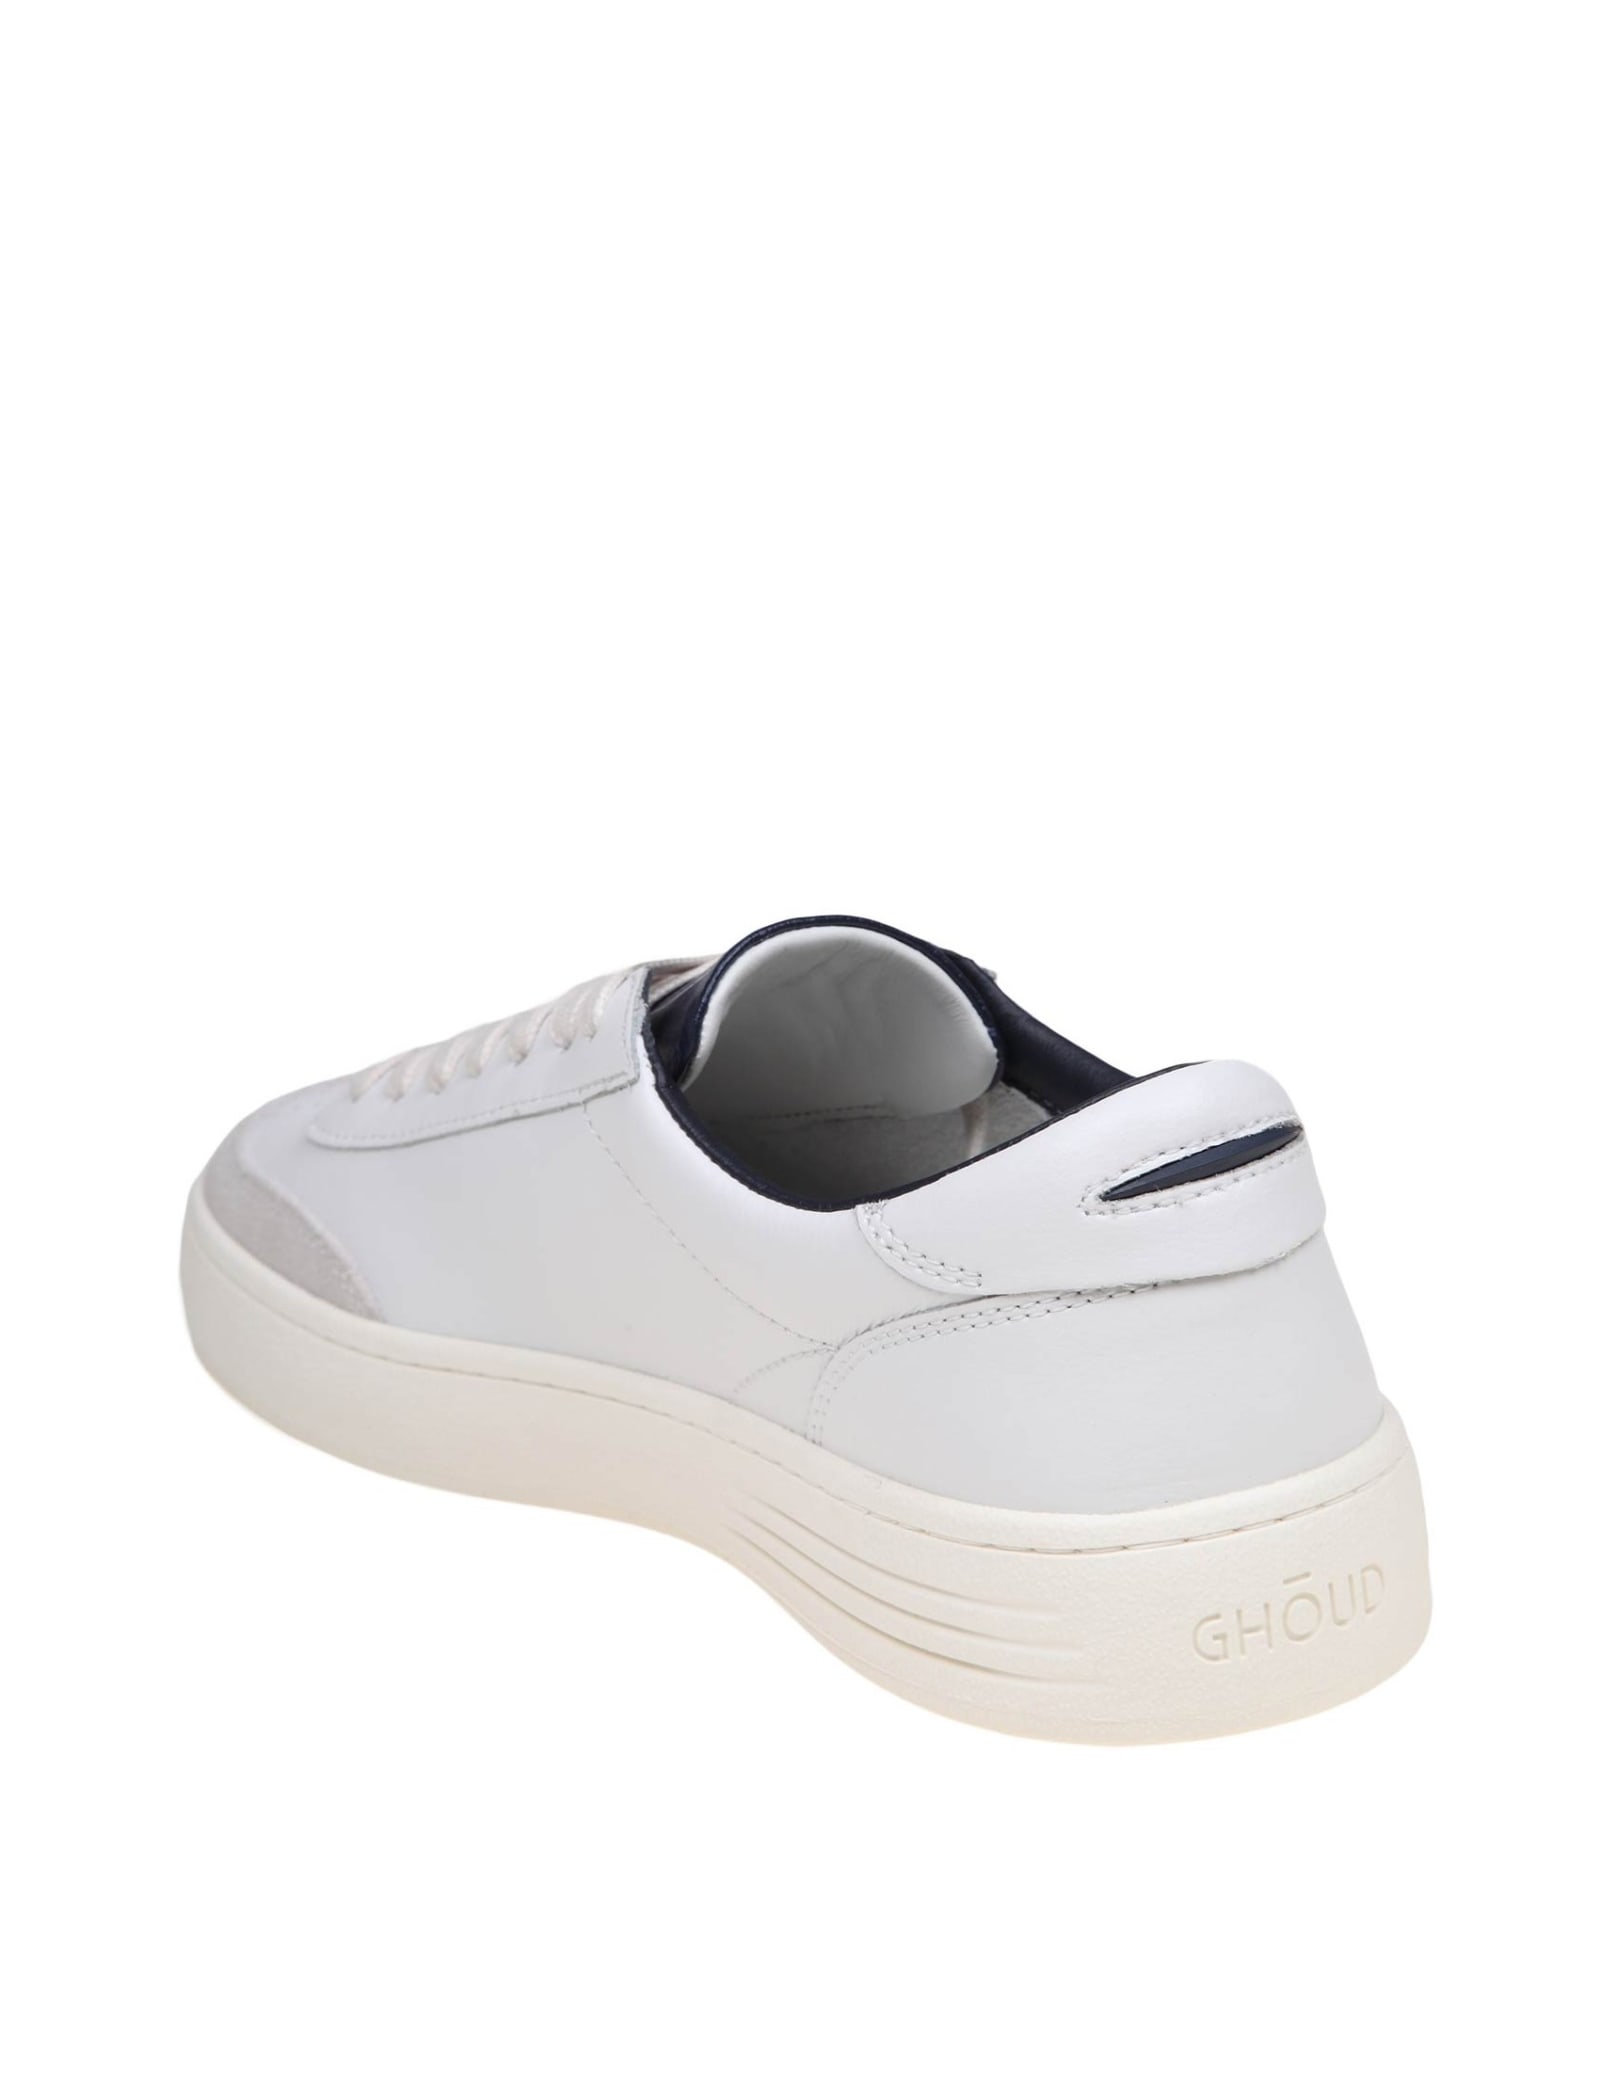 Shop Ghoud Lido Low Sneakers In White/blue Leather And Suede